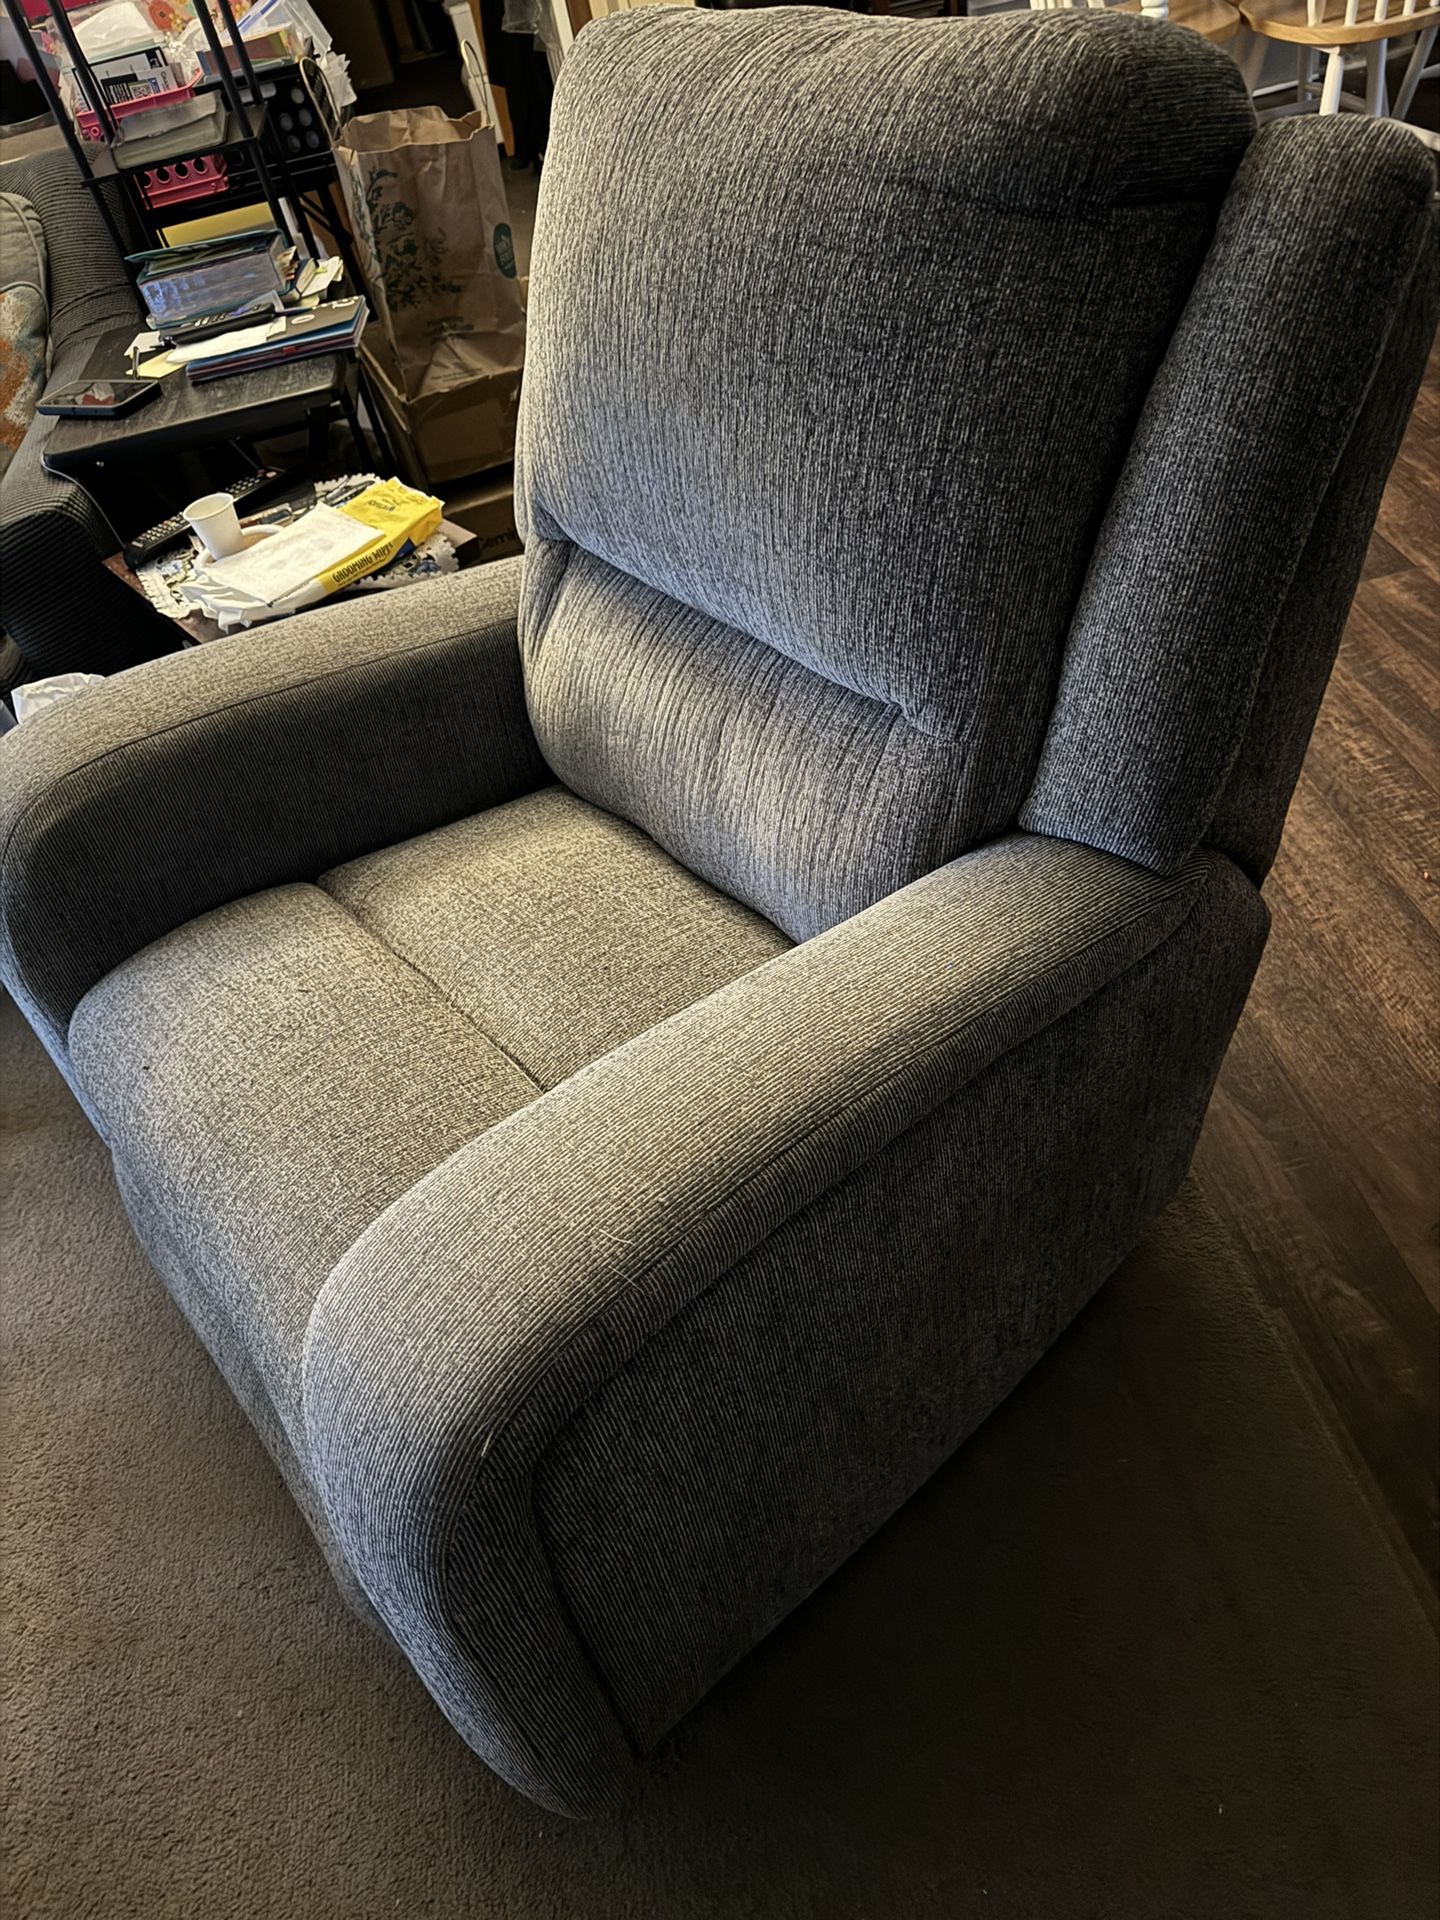 2 Electric Recliners